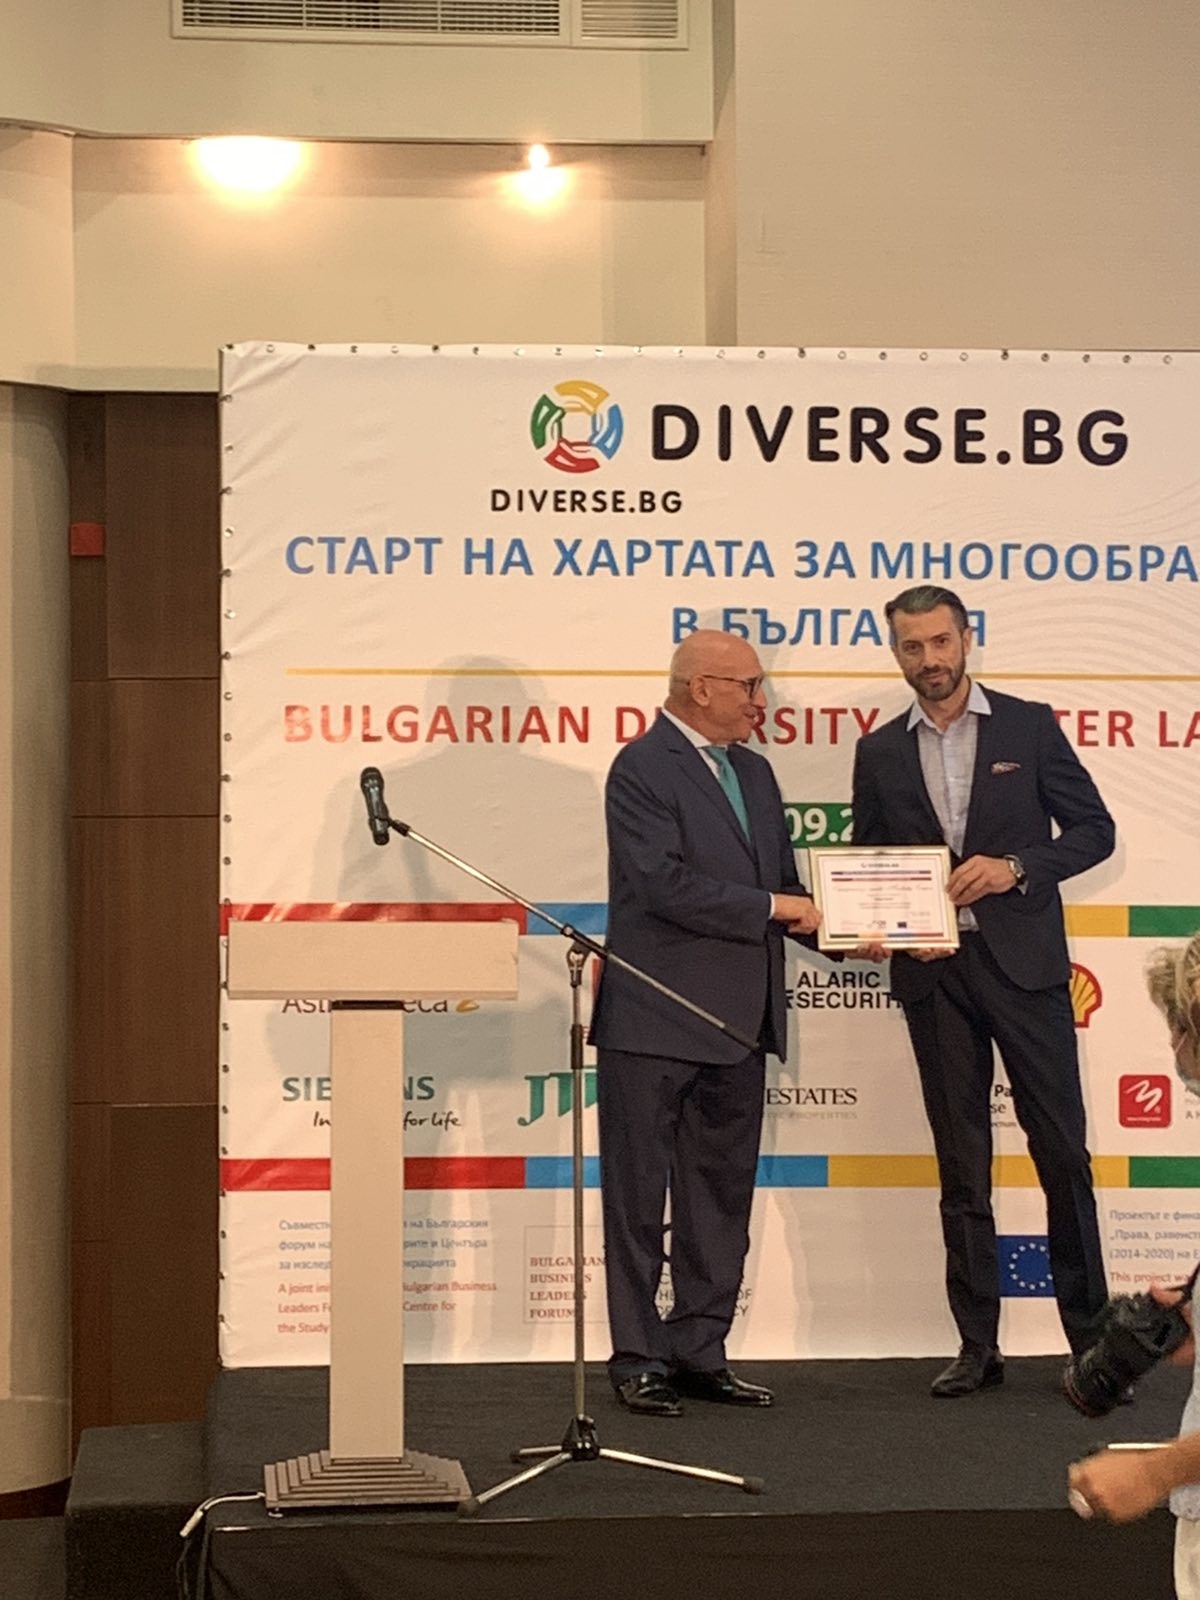 Finally, Bulgarian Diversity Charter Is Here